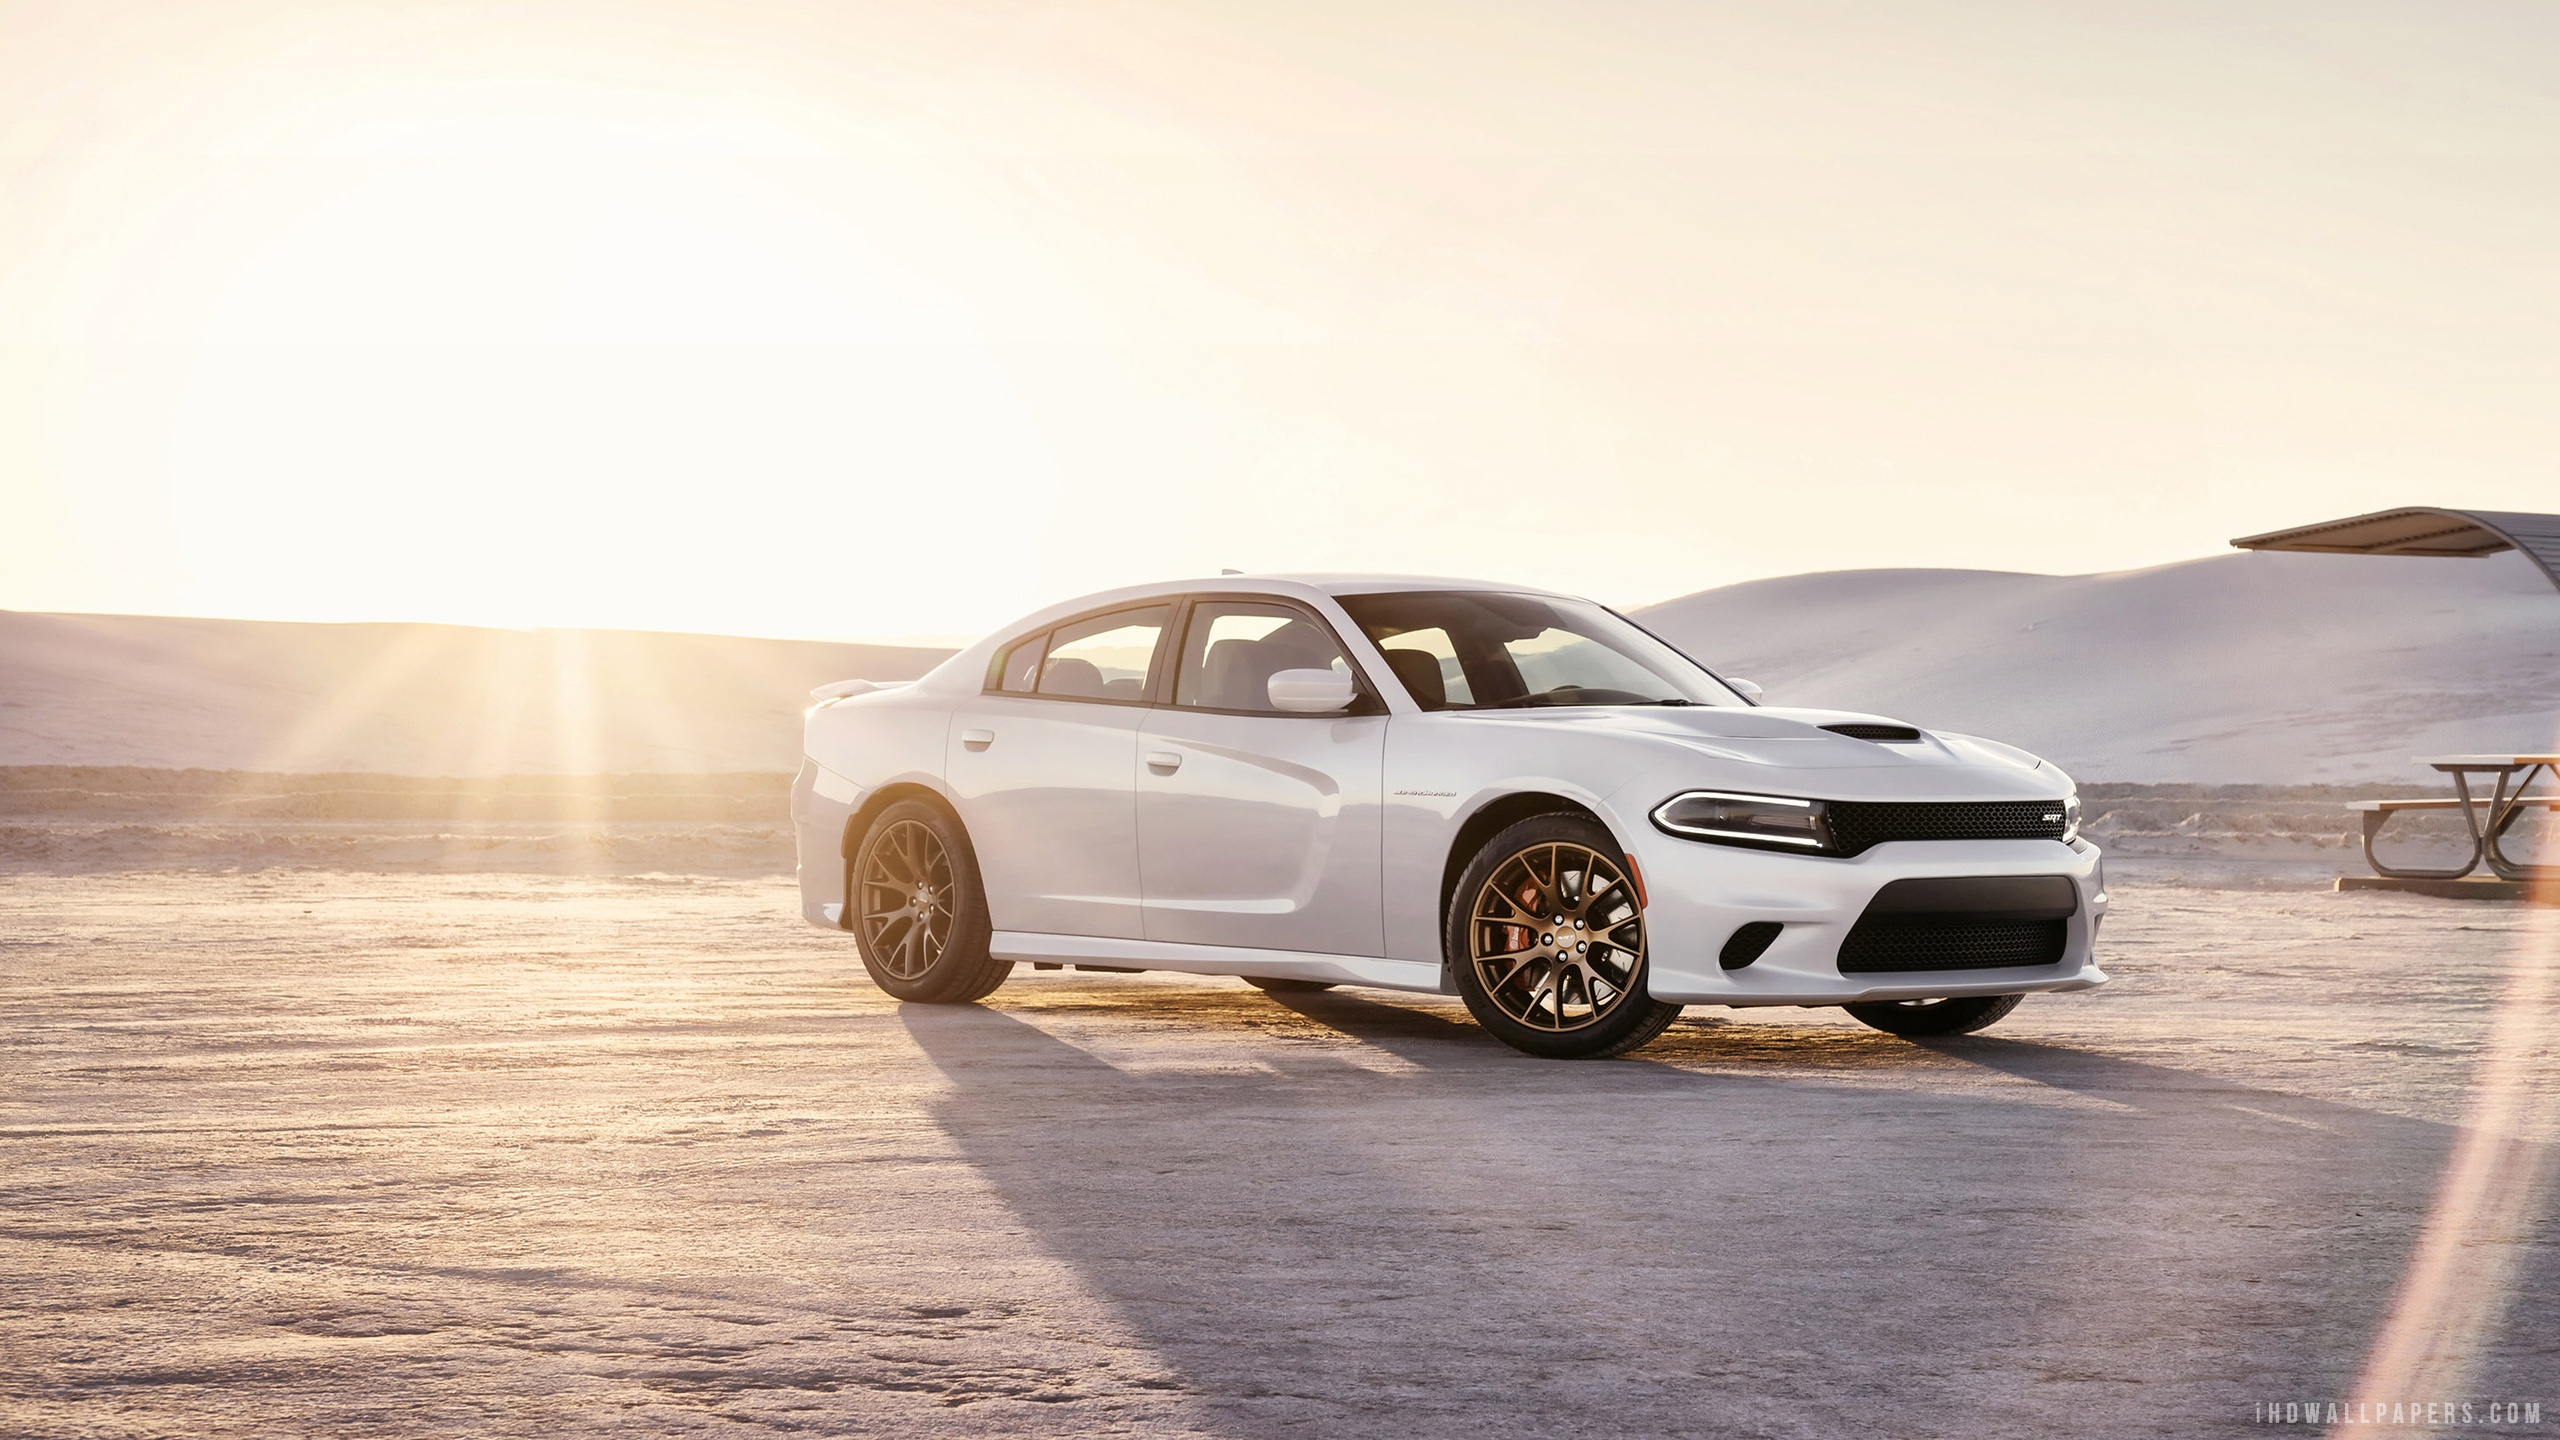 2015 Dodge Charger SRT Hellcat White HD Wallpaper   iHD Wallpapers